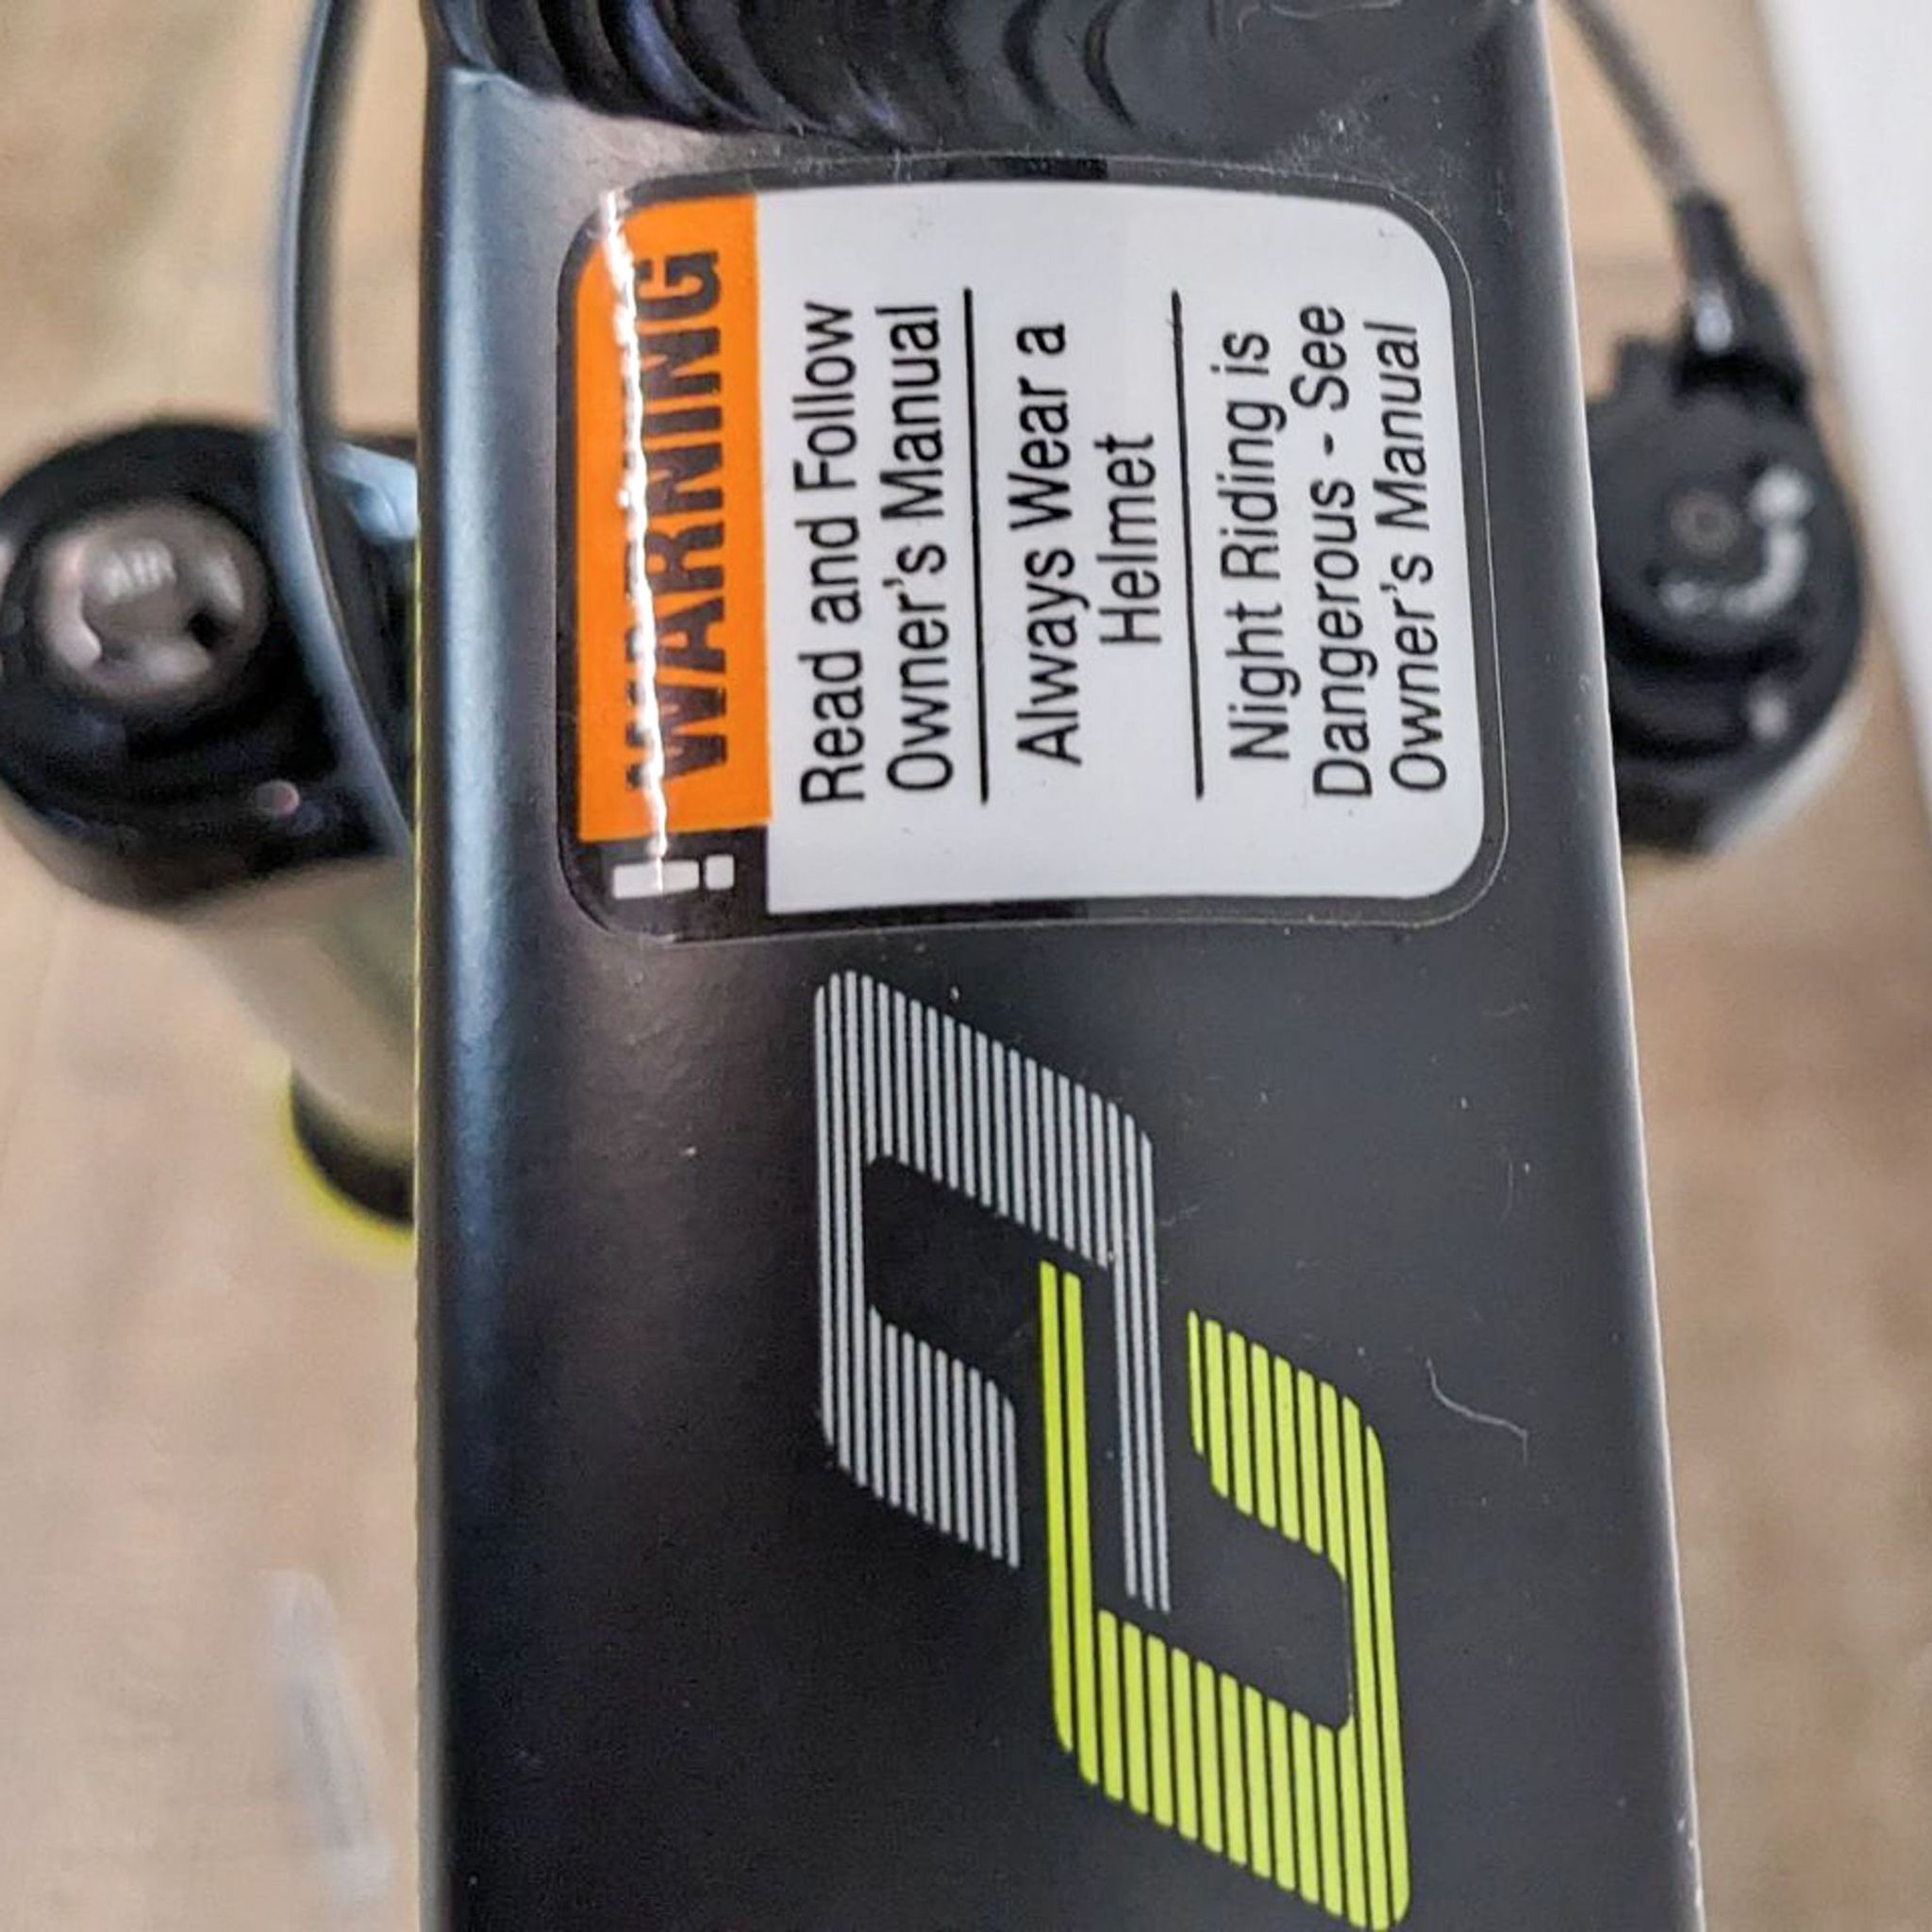 Close-up of a warning sticker on a bicycle frame with a black and yellow REI brand logo, advising to read the manual and always wear a helmet.